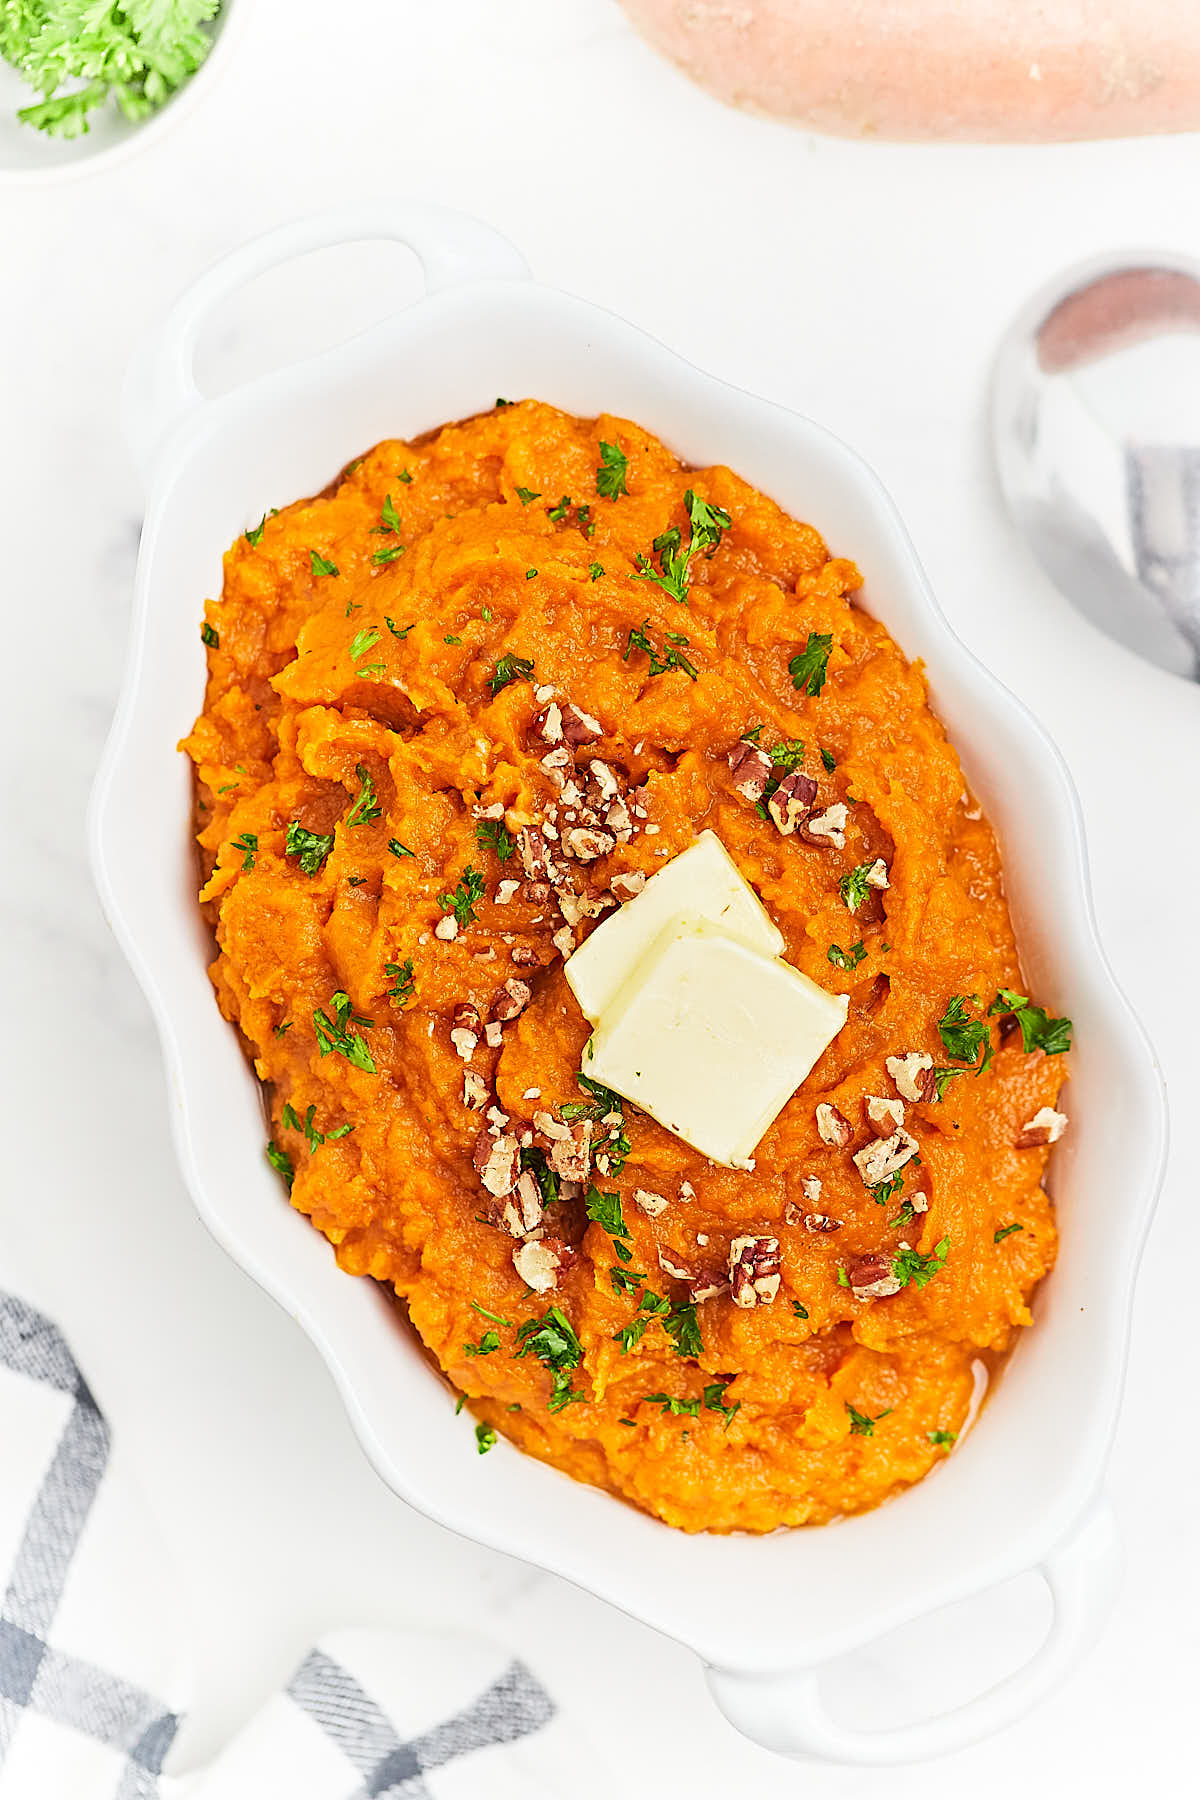 Top-down view of a serving bowl filled with Mashed Sweet Potatoes.